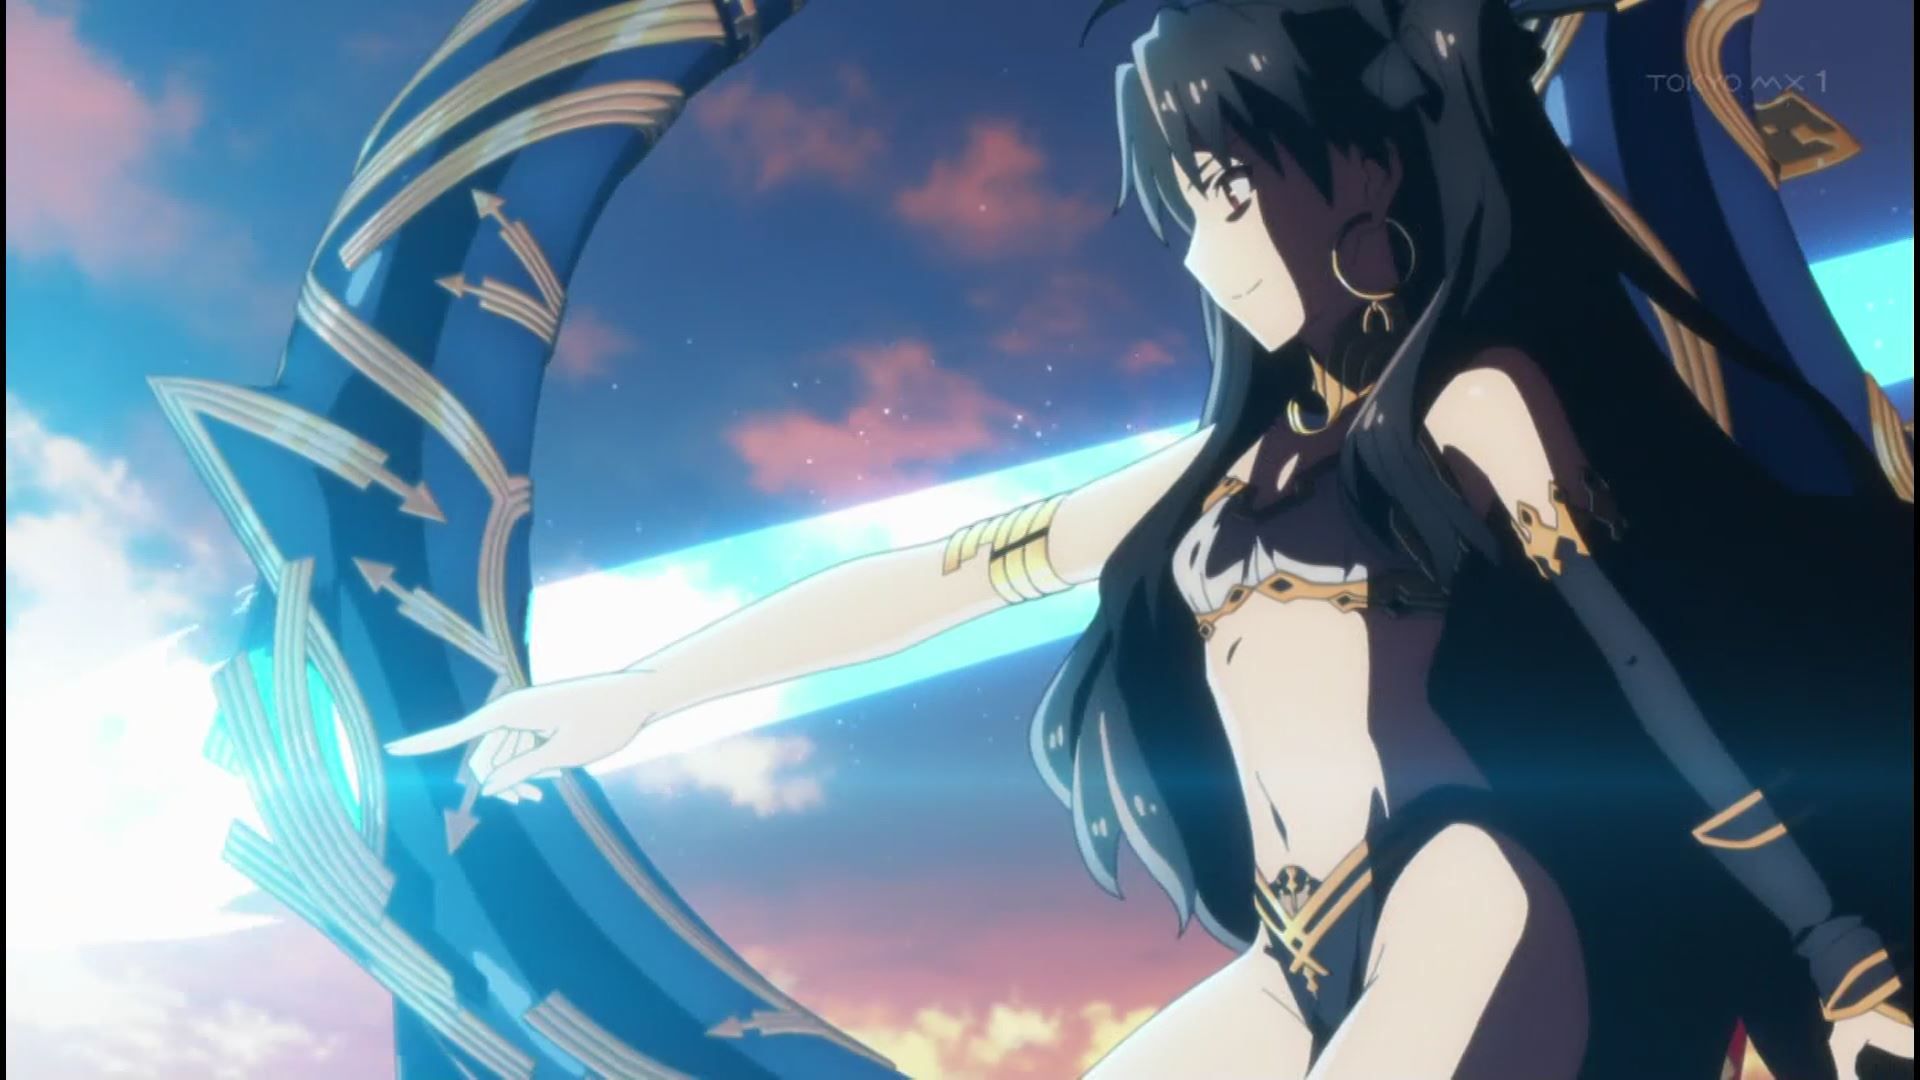 Anime [Fate / Grand Order Babylonia] 6 episodes such as Eleshkigar and Ishtar's naked figure 12